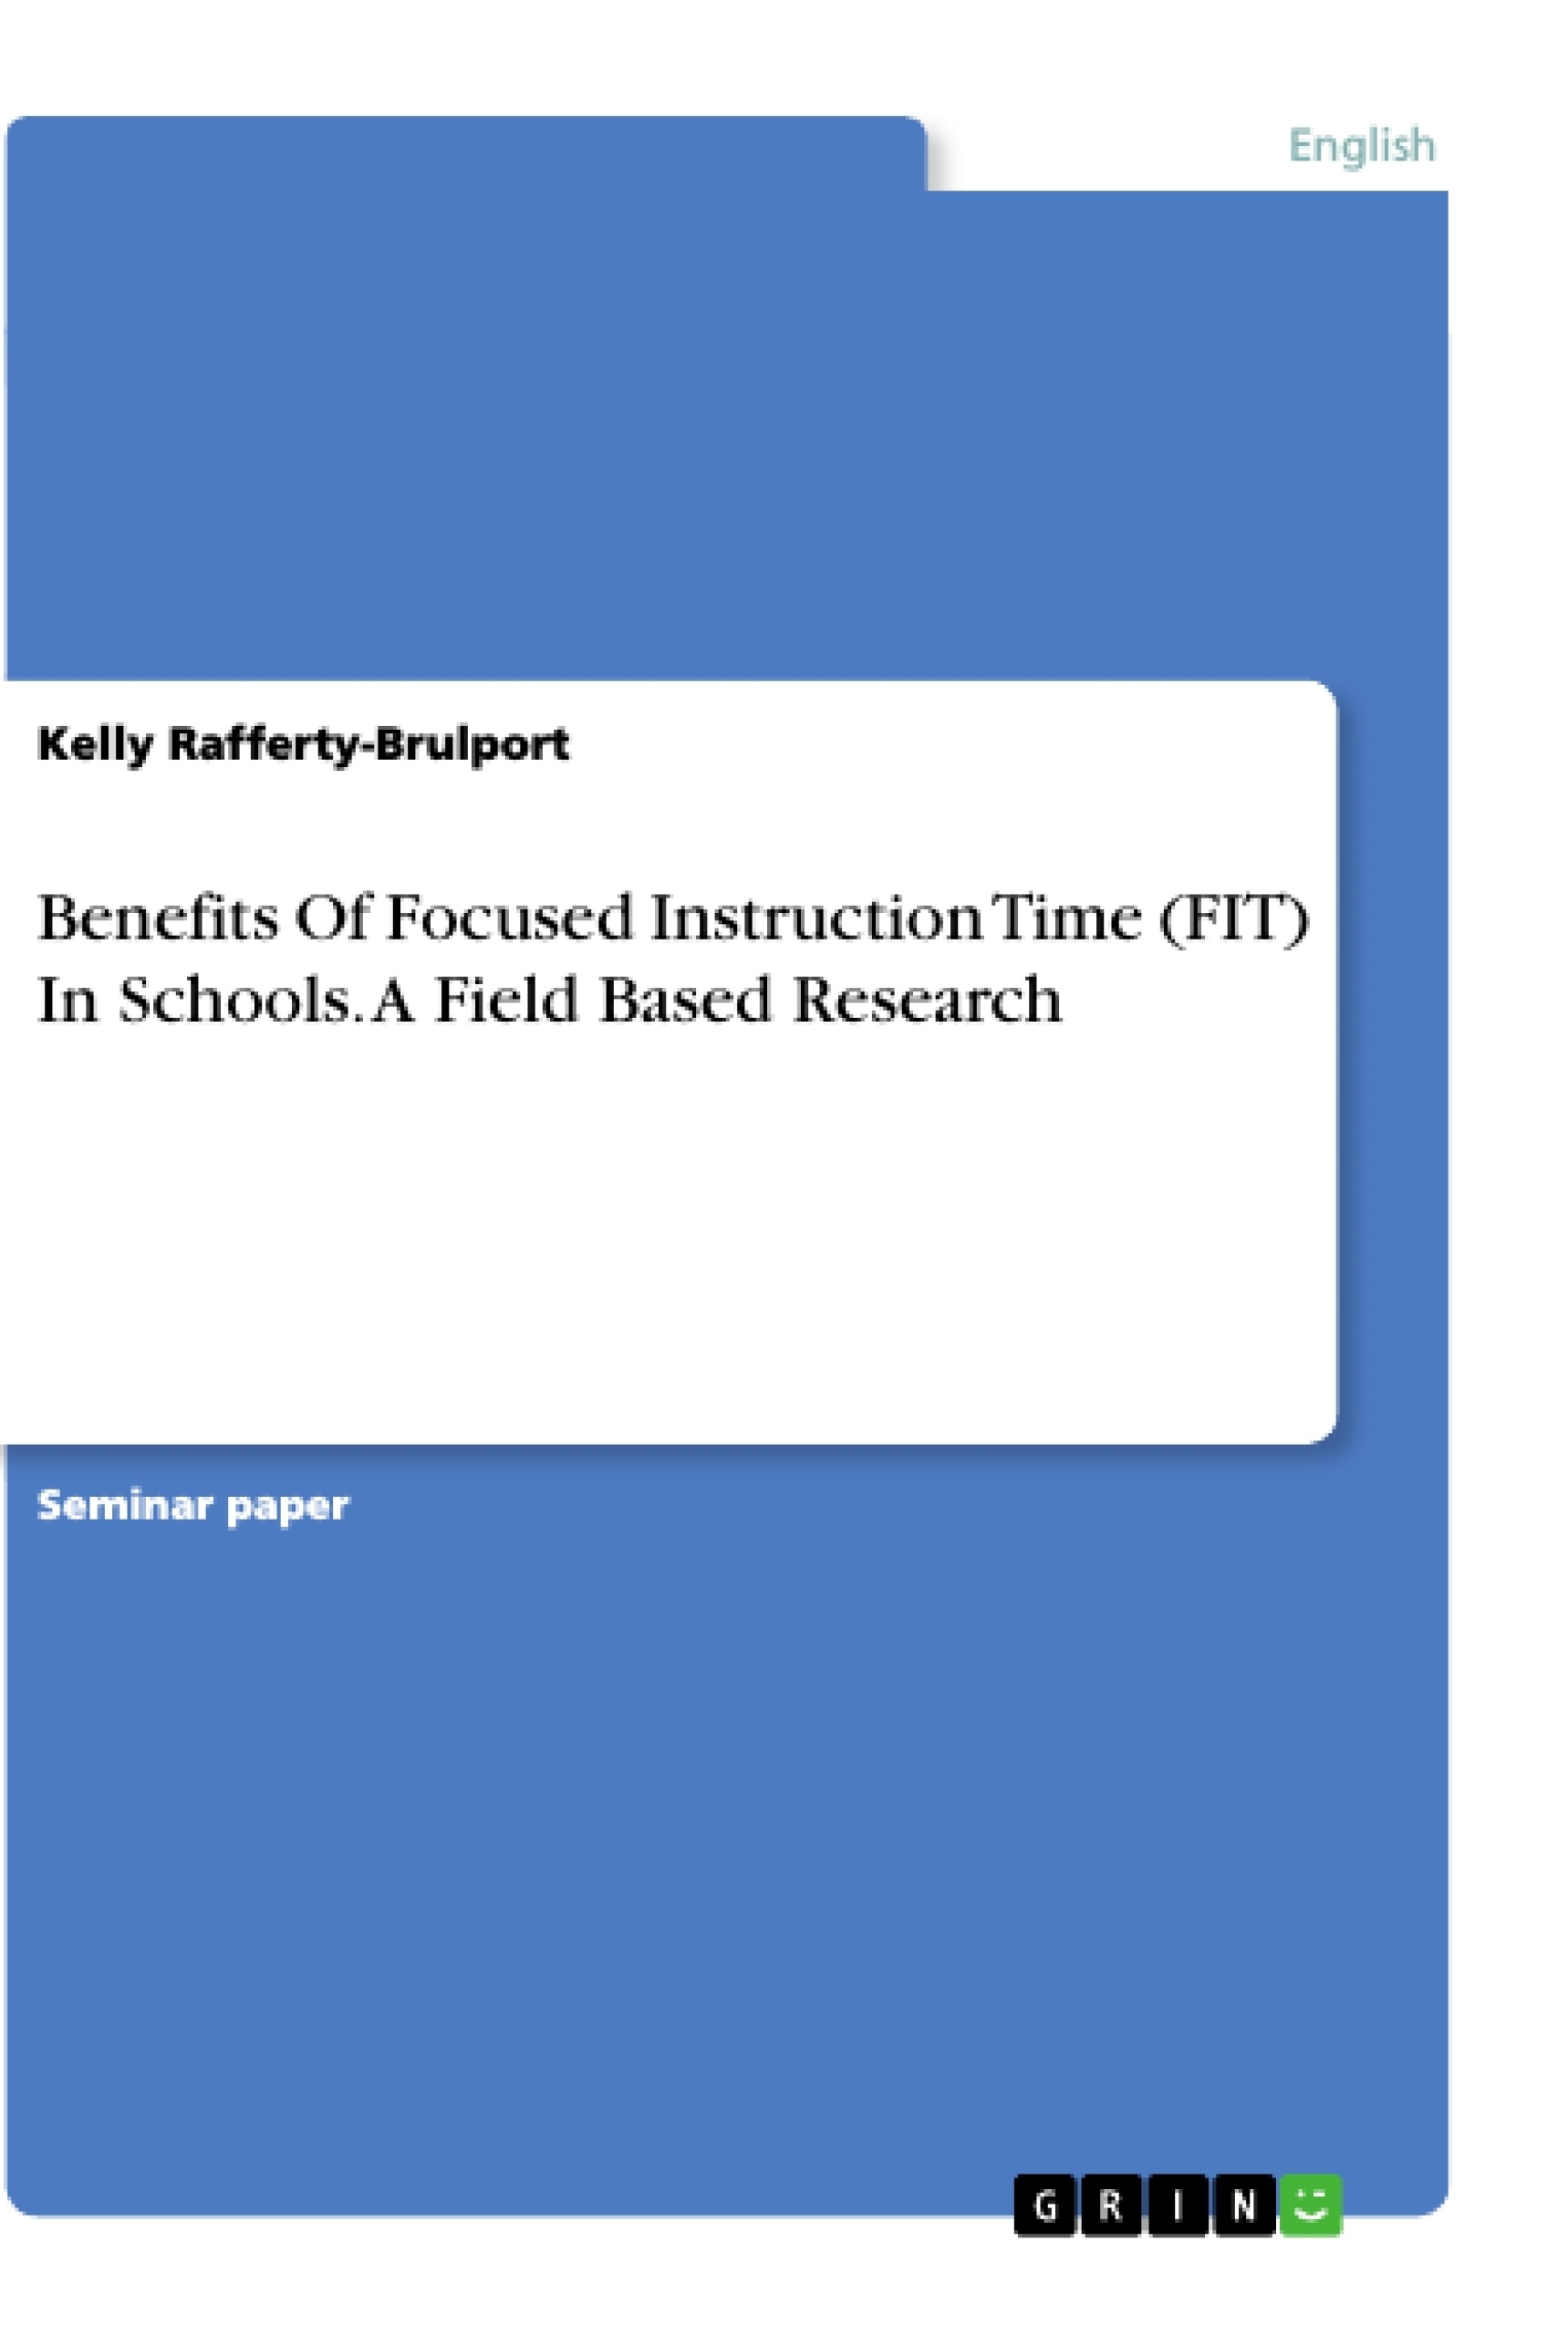 Título: Benefits Of Focused Instruction Time (FIT) In Schools. A Field Based Research